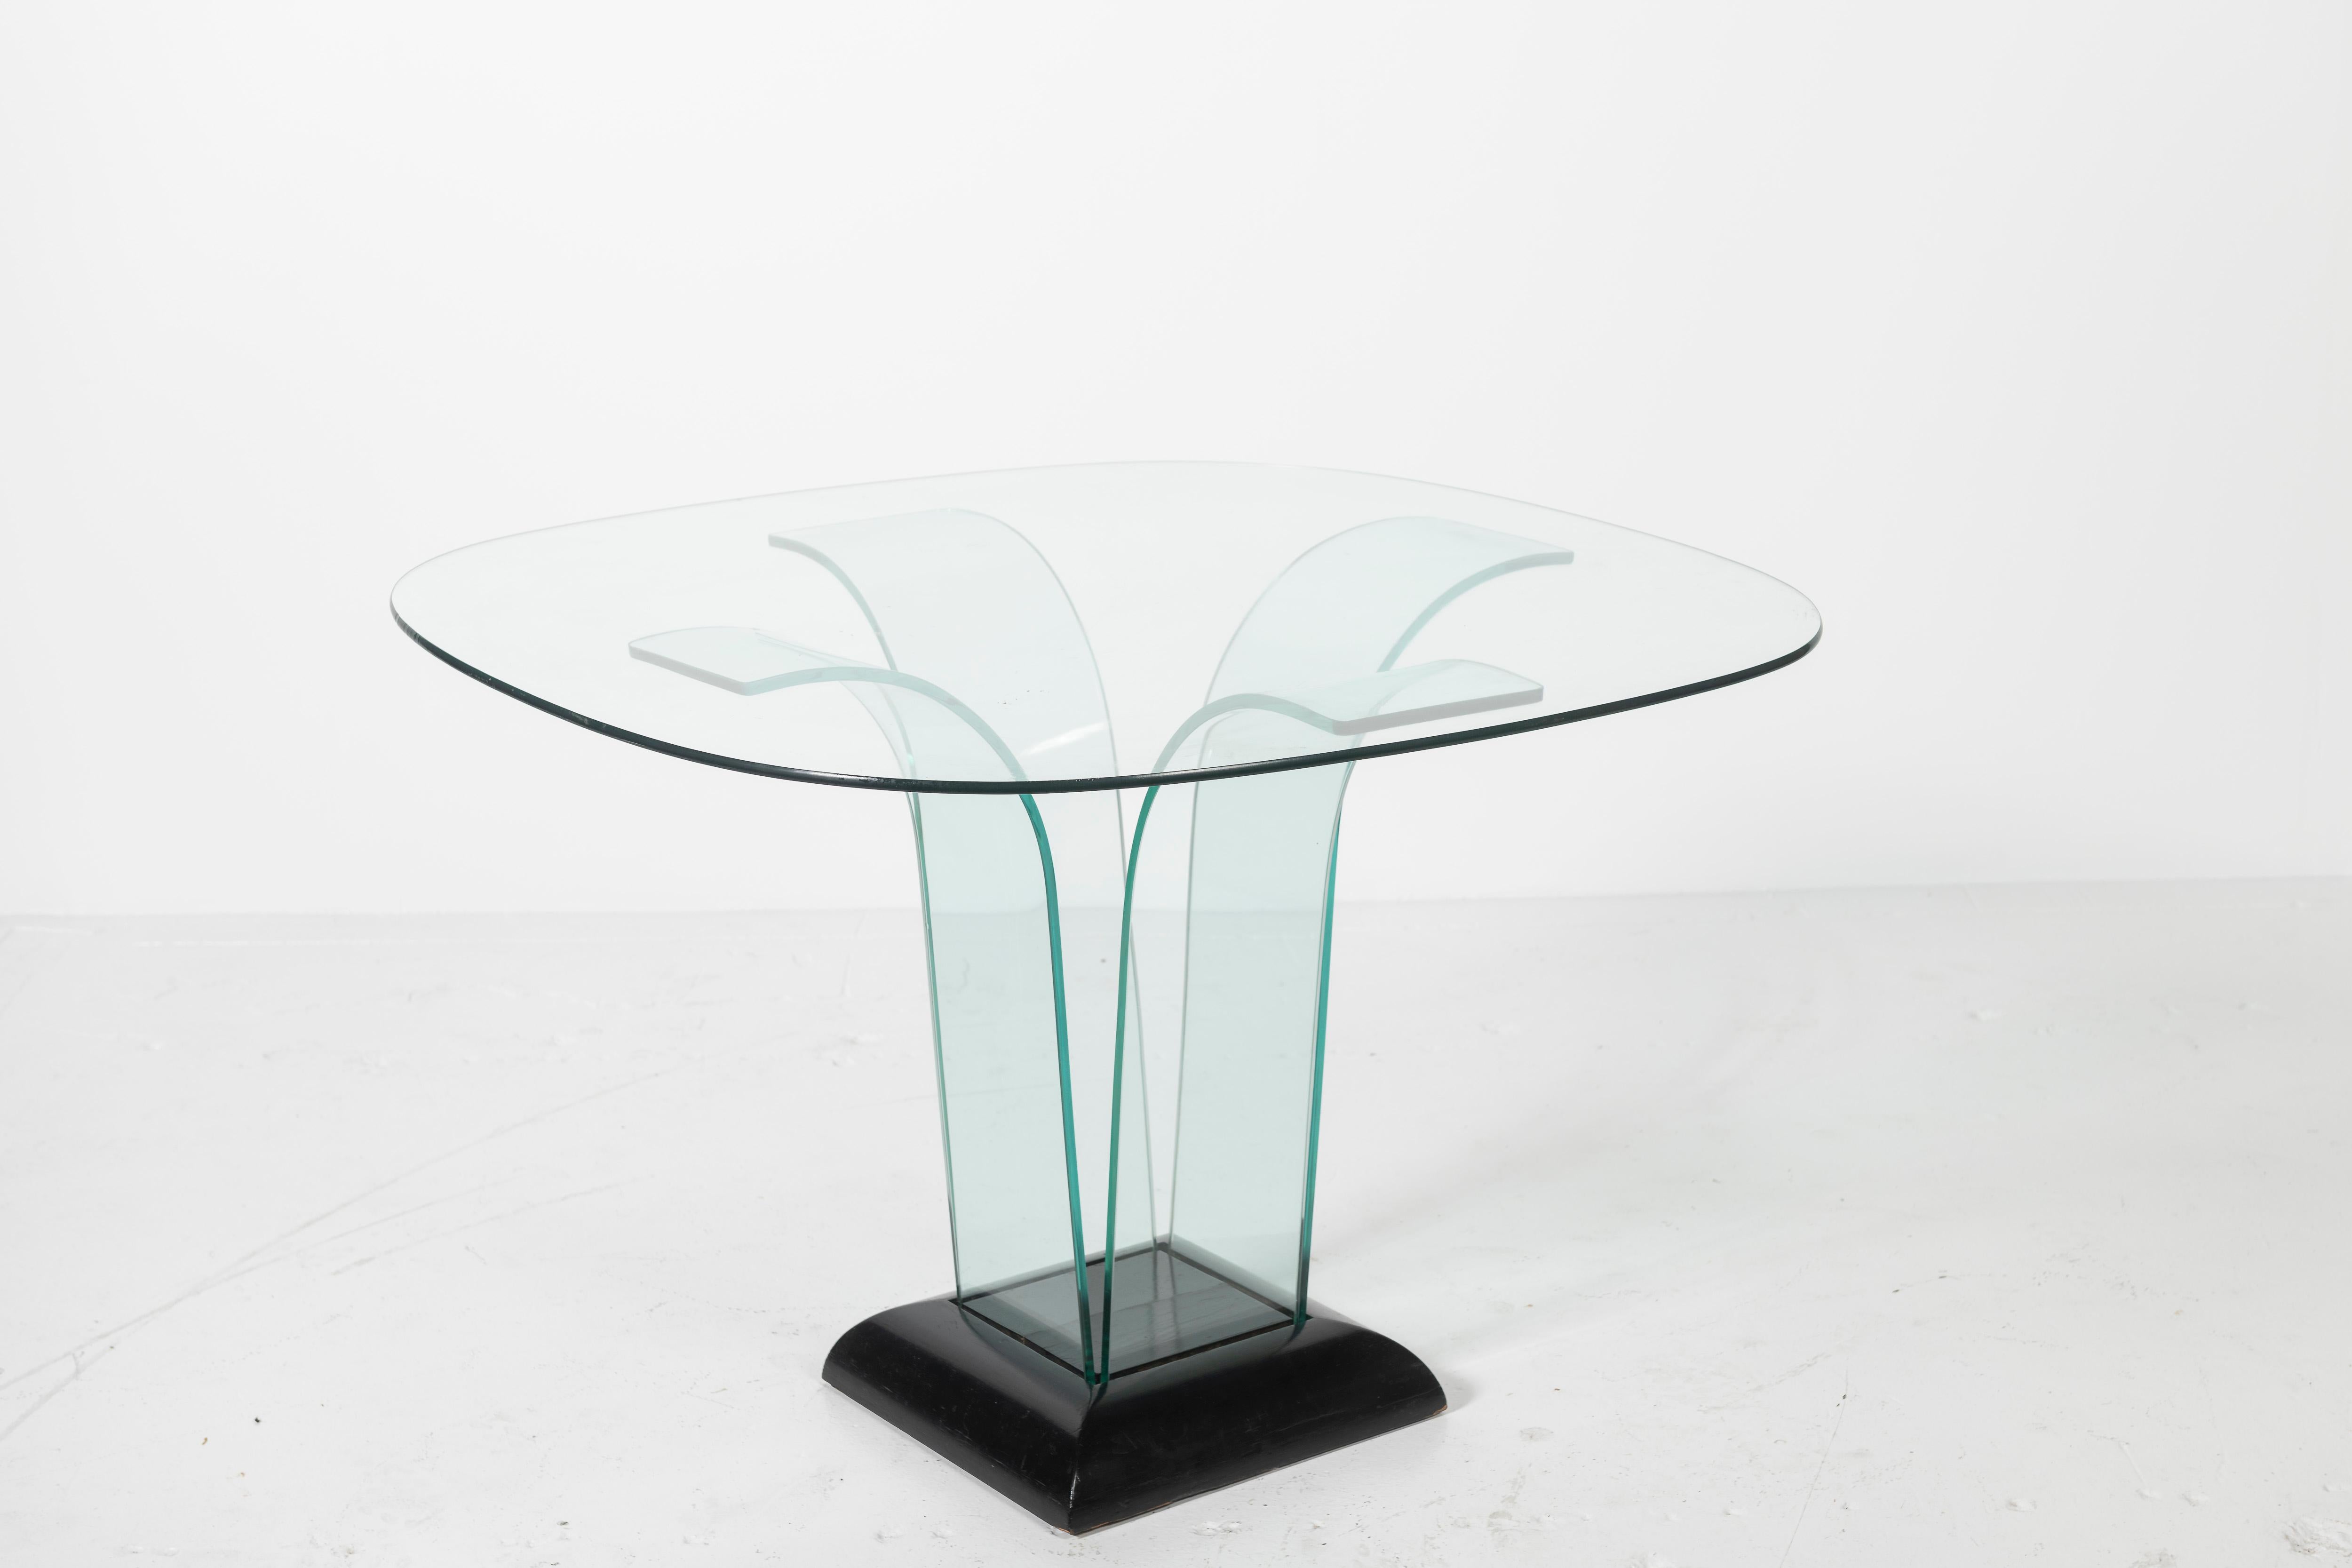 Sculptural center table in rounded rectangular glass with curved glass supports floating in an ebonized wood base by Modernage is a classic. Lovely for an entryway or spacious room.